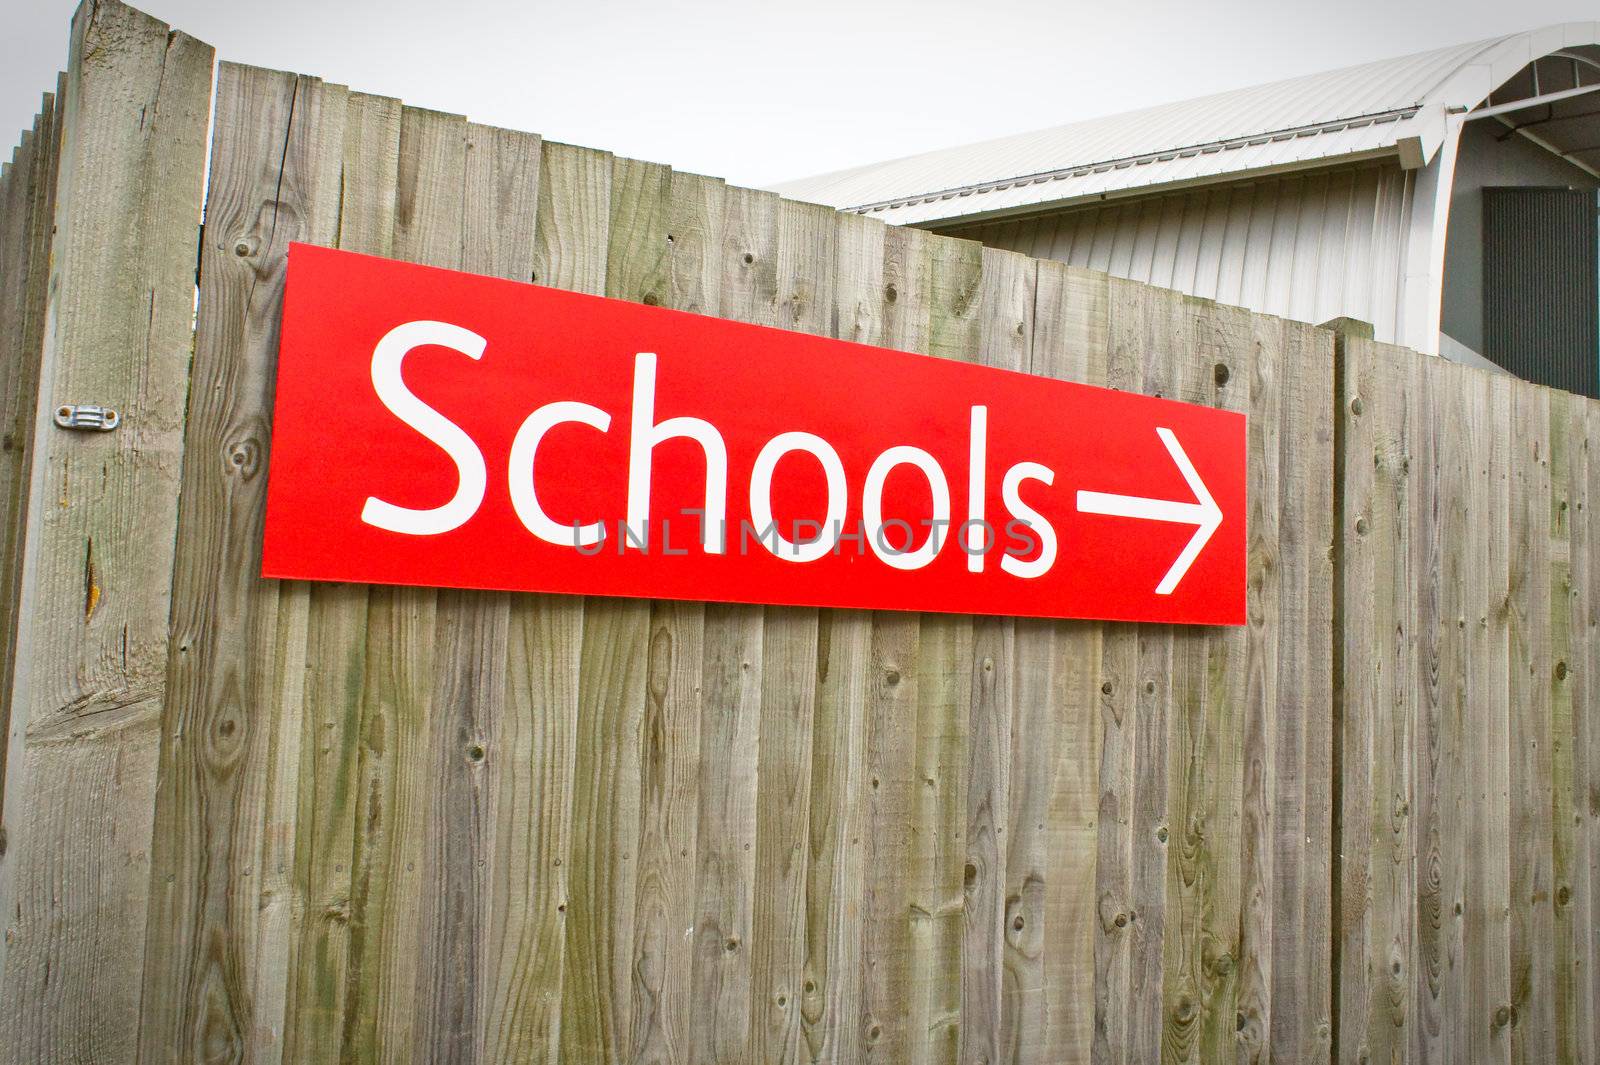 A vibrant red school sign on a wooden fence